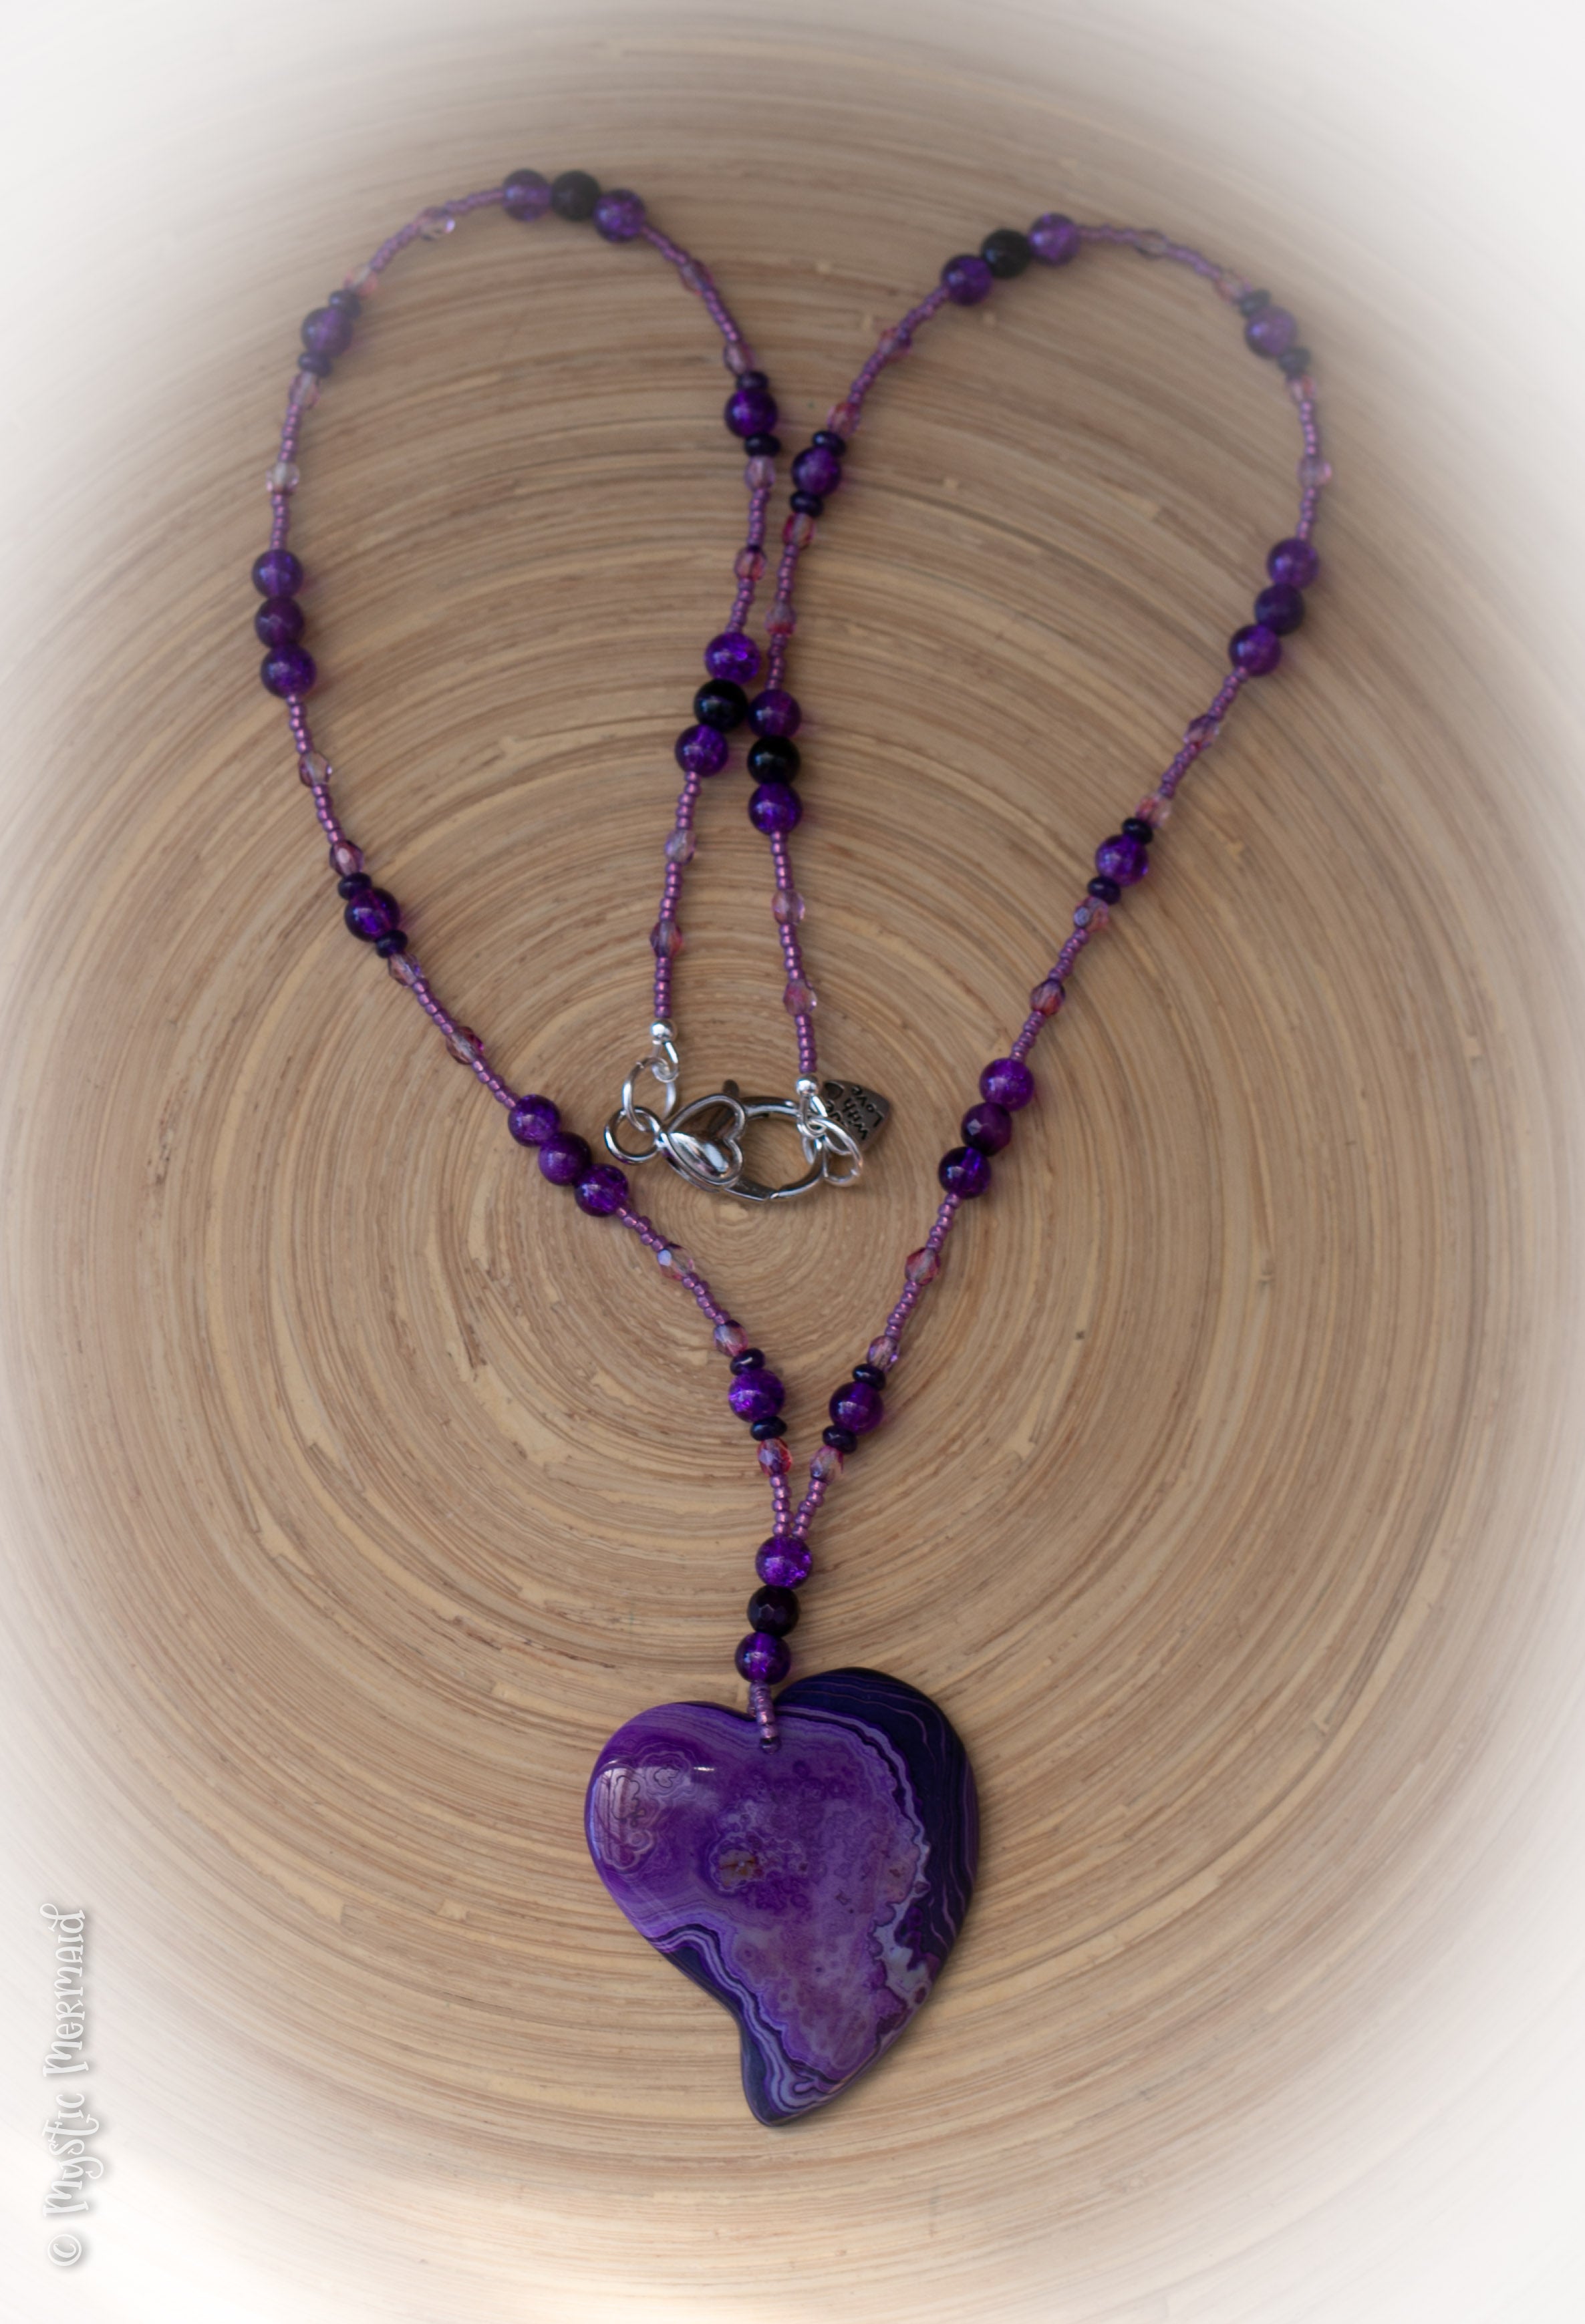 Purple Delight – Agate Heart, Faceted Amethyst and Crackle Quartz Necklace